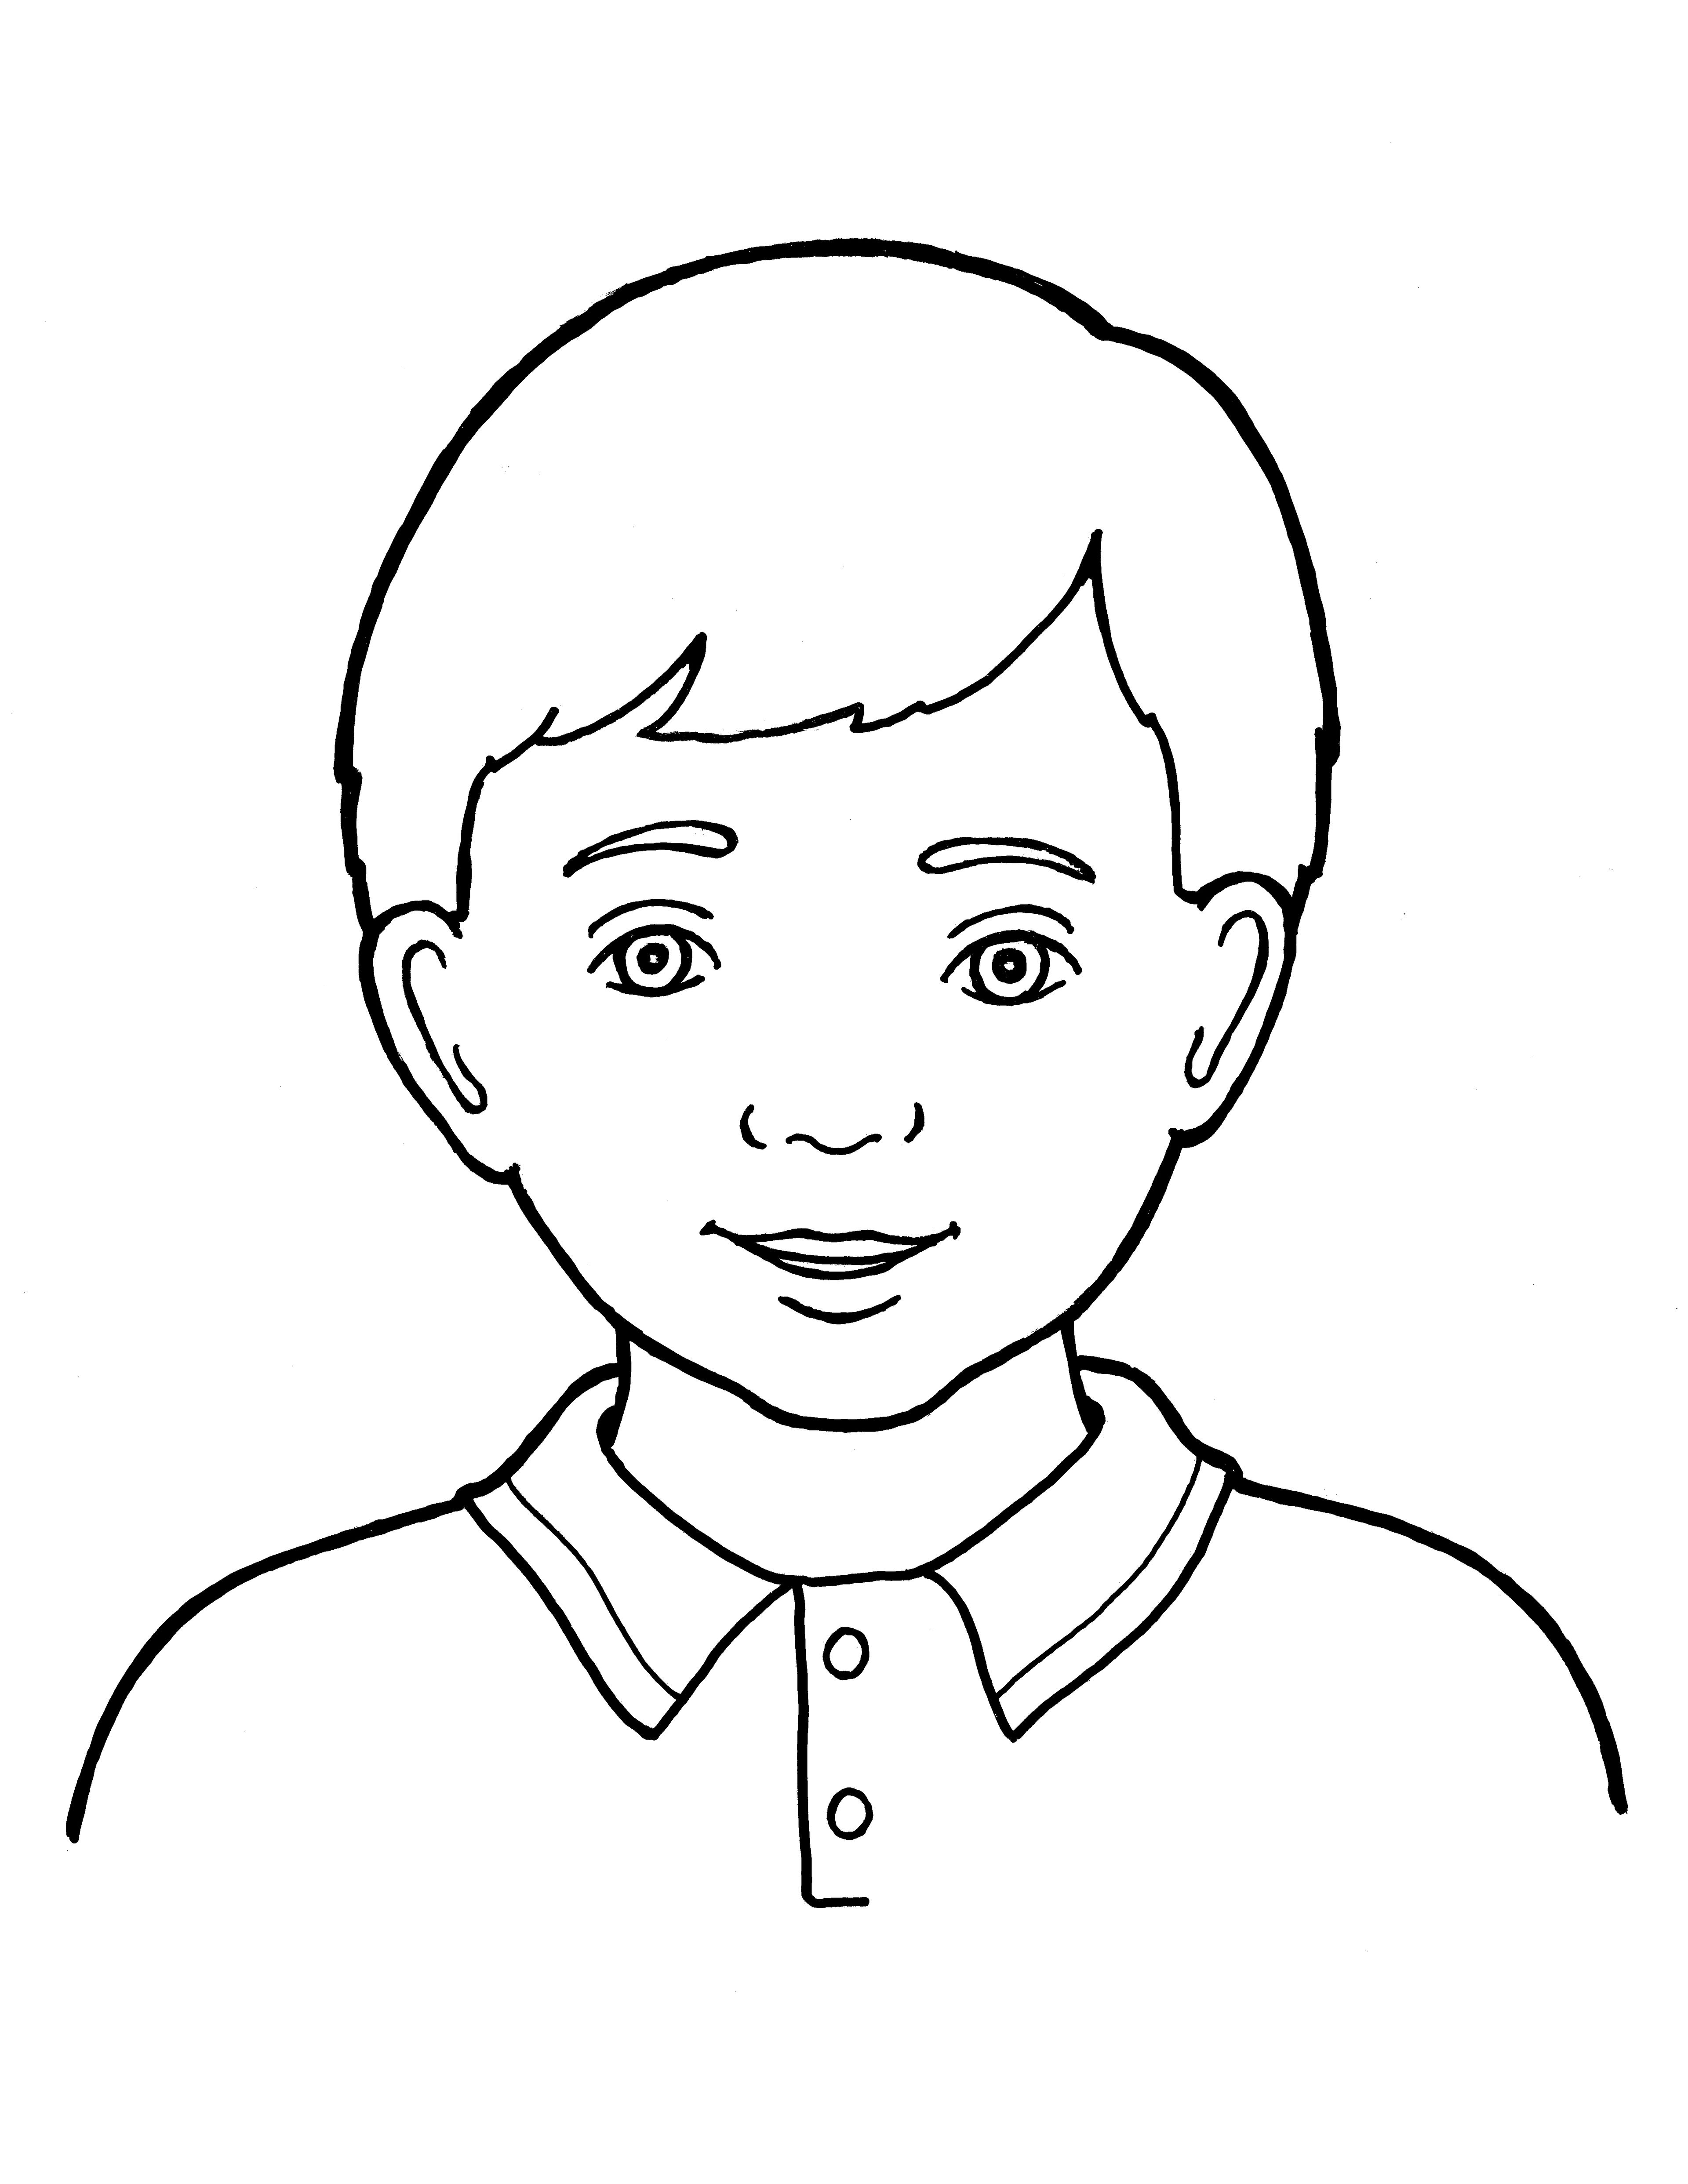 A line drawing of a Primary boy with a collared shirt, from the nursery manual Behold Your Little Ones (2008), page 71.